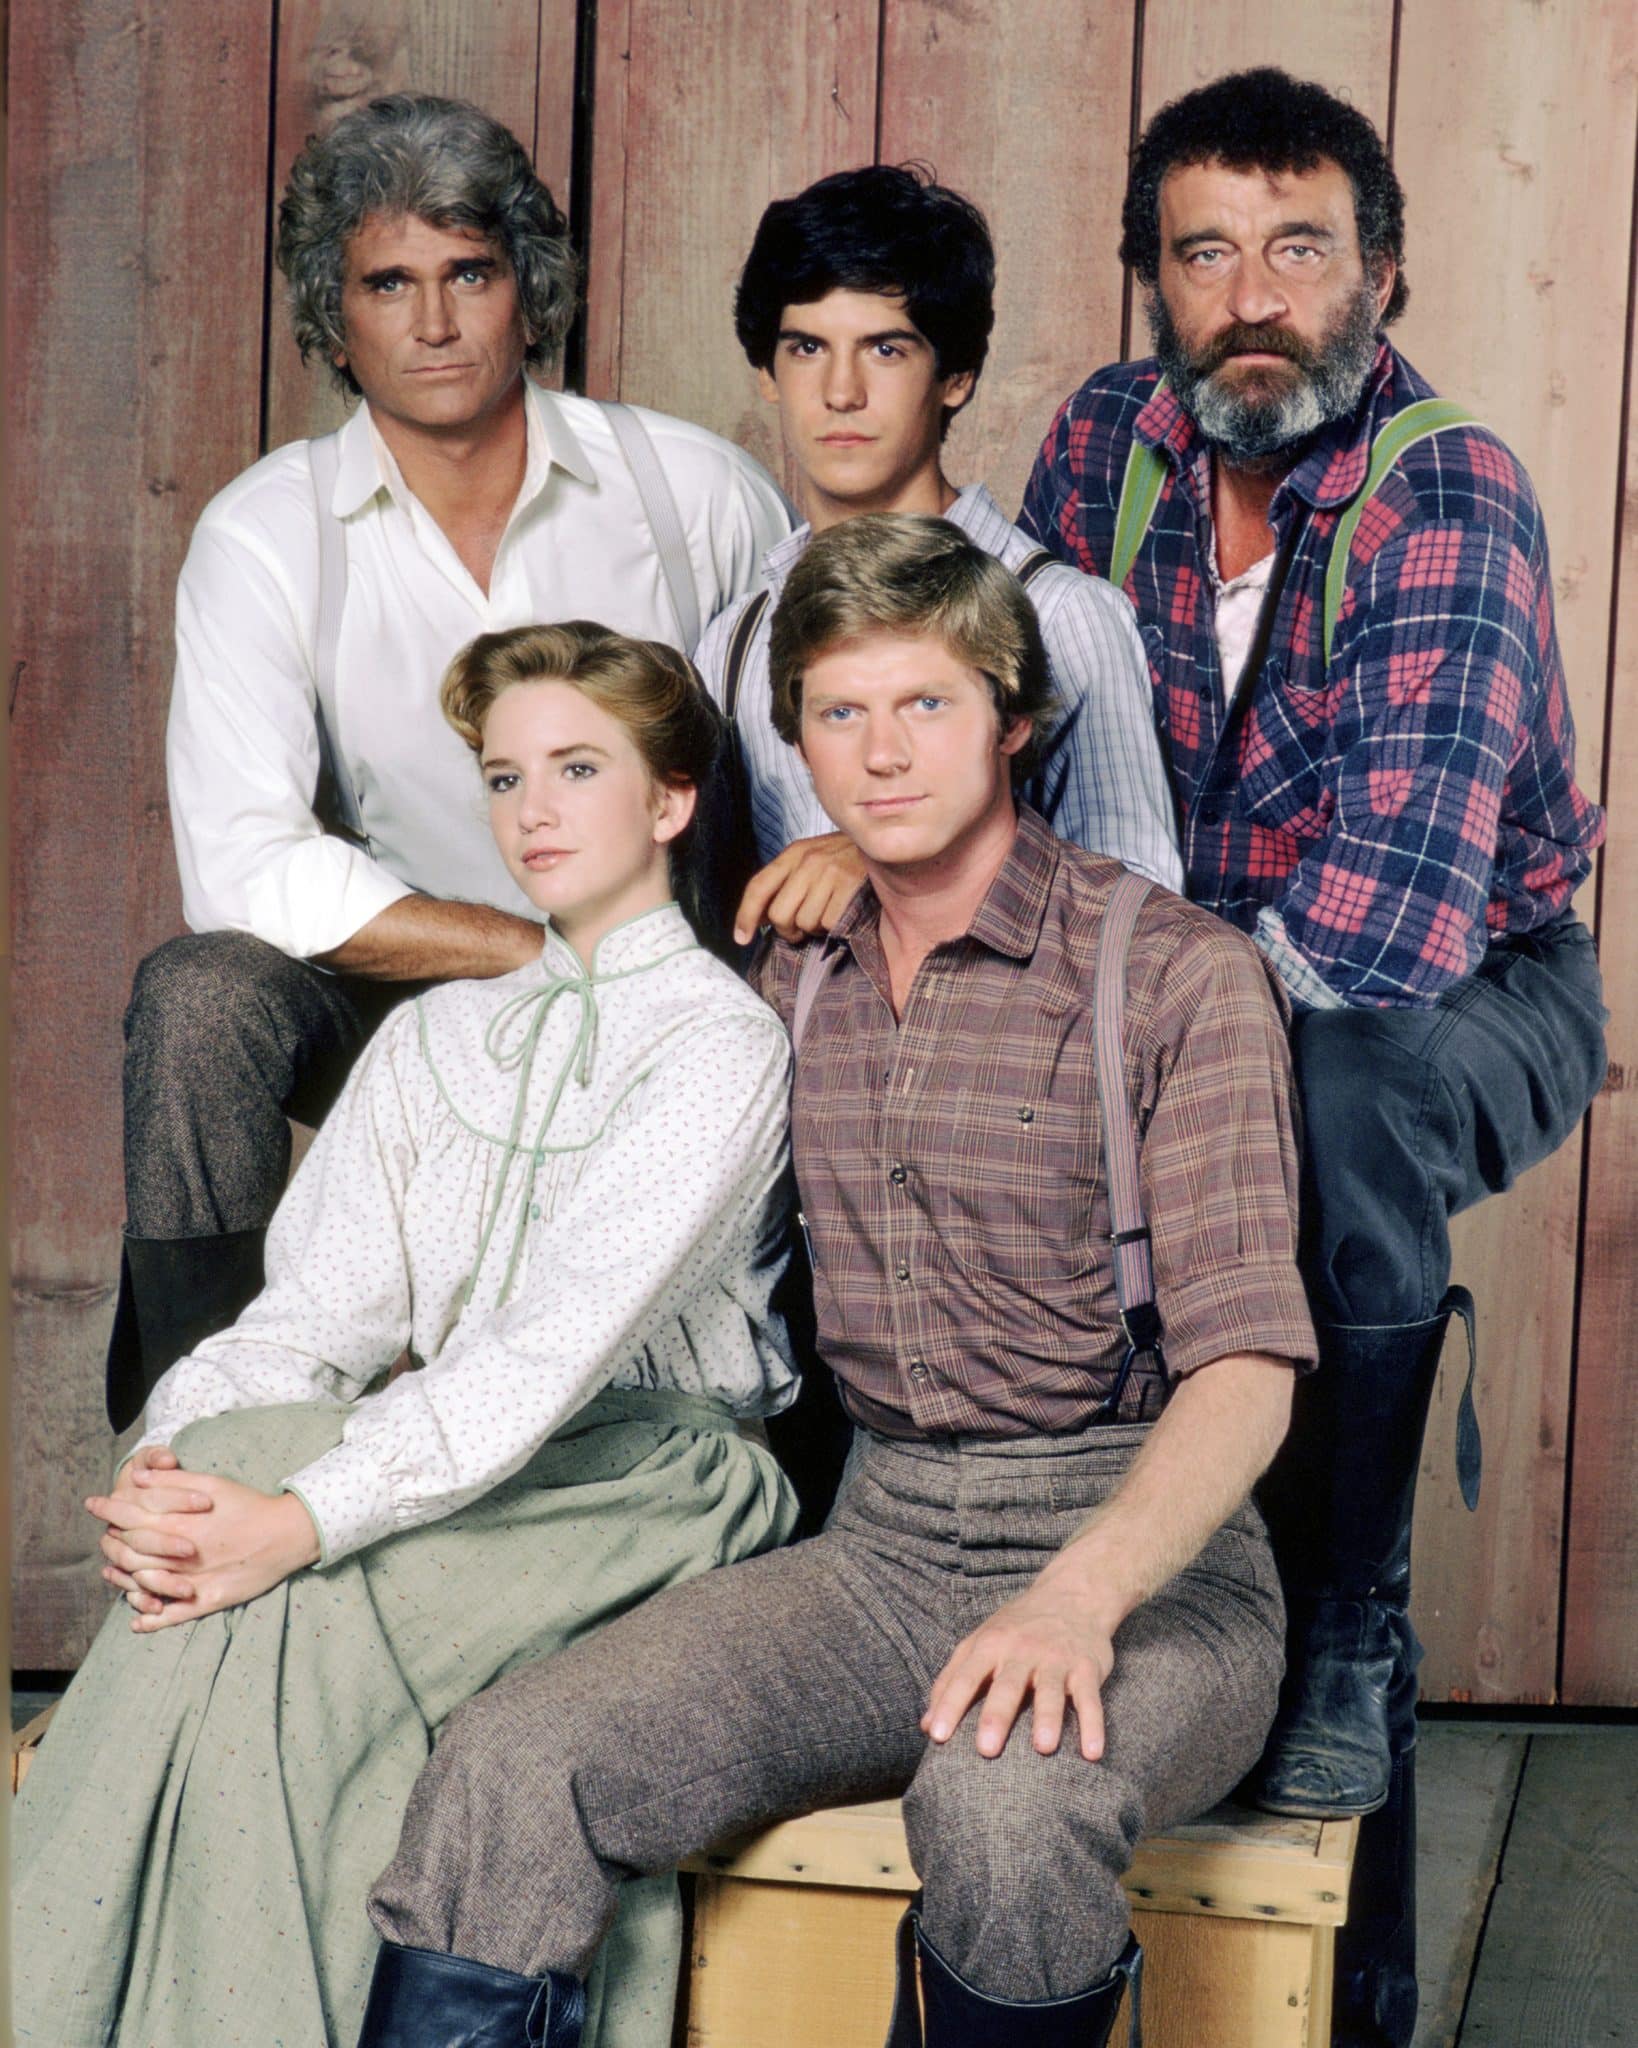 Some "Little House" cast members, including Melissa Gilbert and Dean Butler, who shared an on-screen kiss.